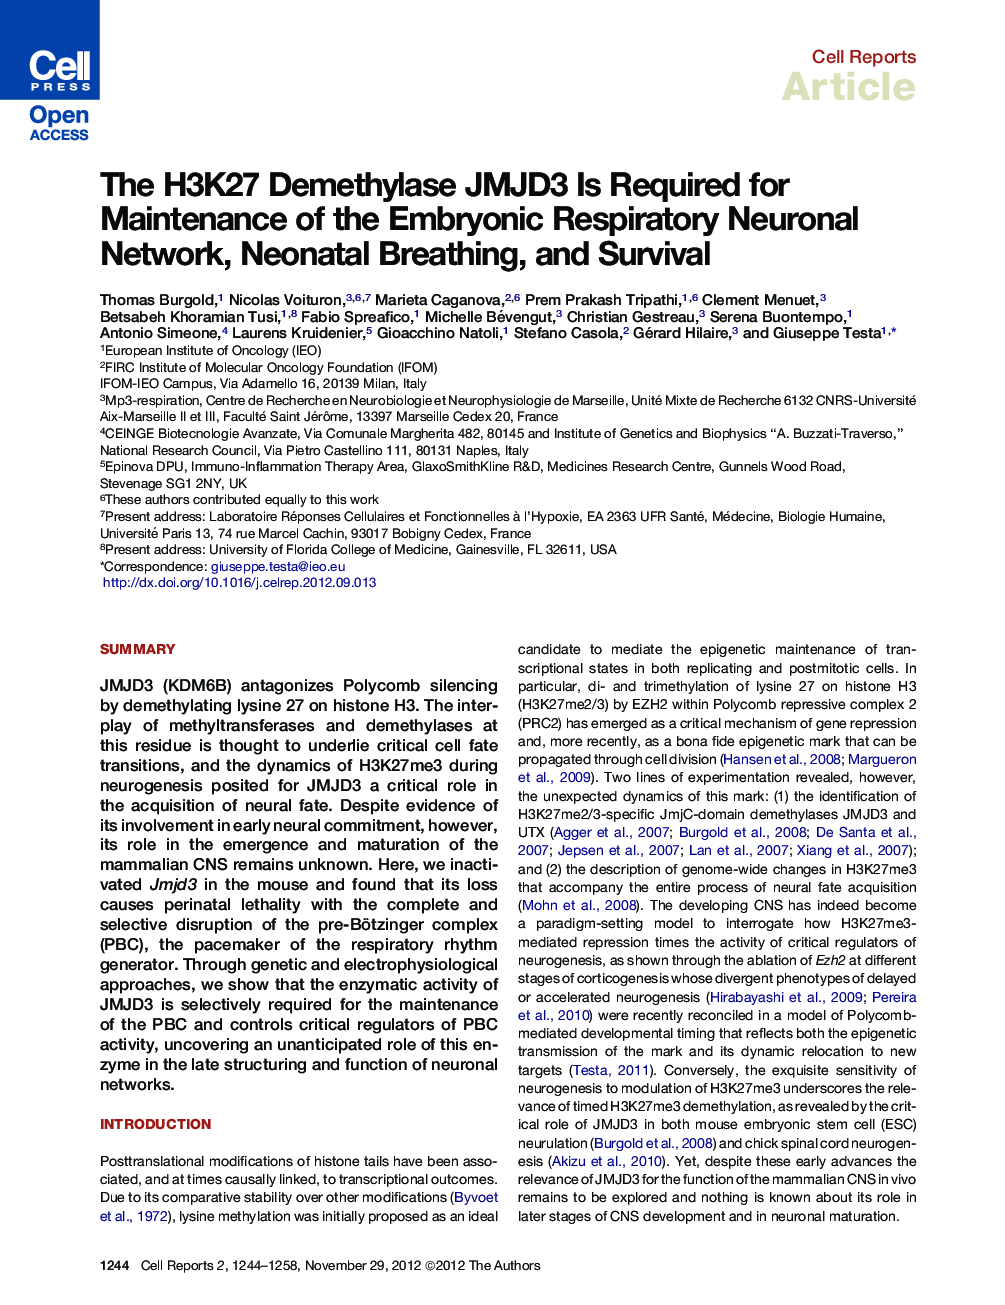 The H3K27 Demethylase JMJD3 Is Required for Maintenance of the Embryonic Respiratory Neuronal Network, Neonatal Breathing, and Survival